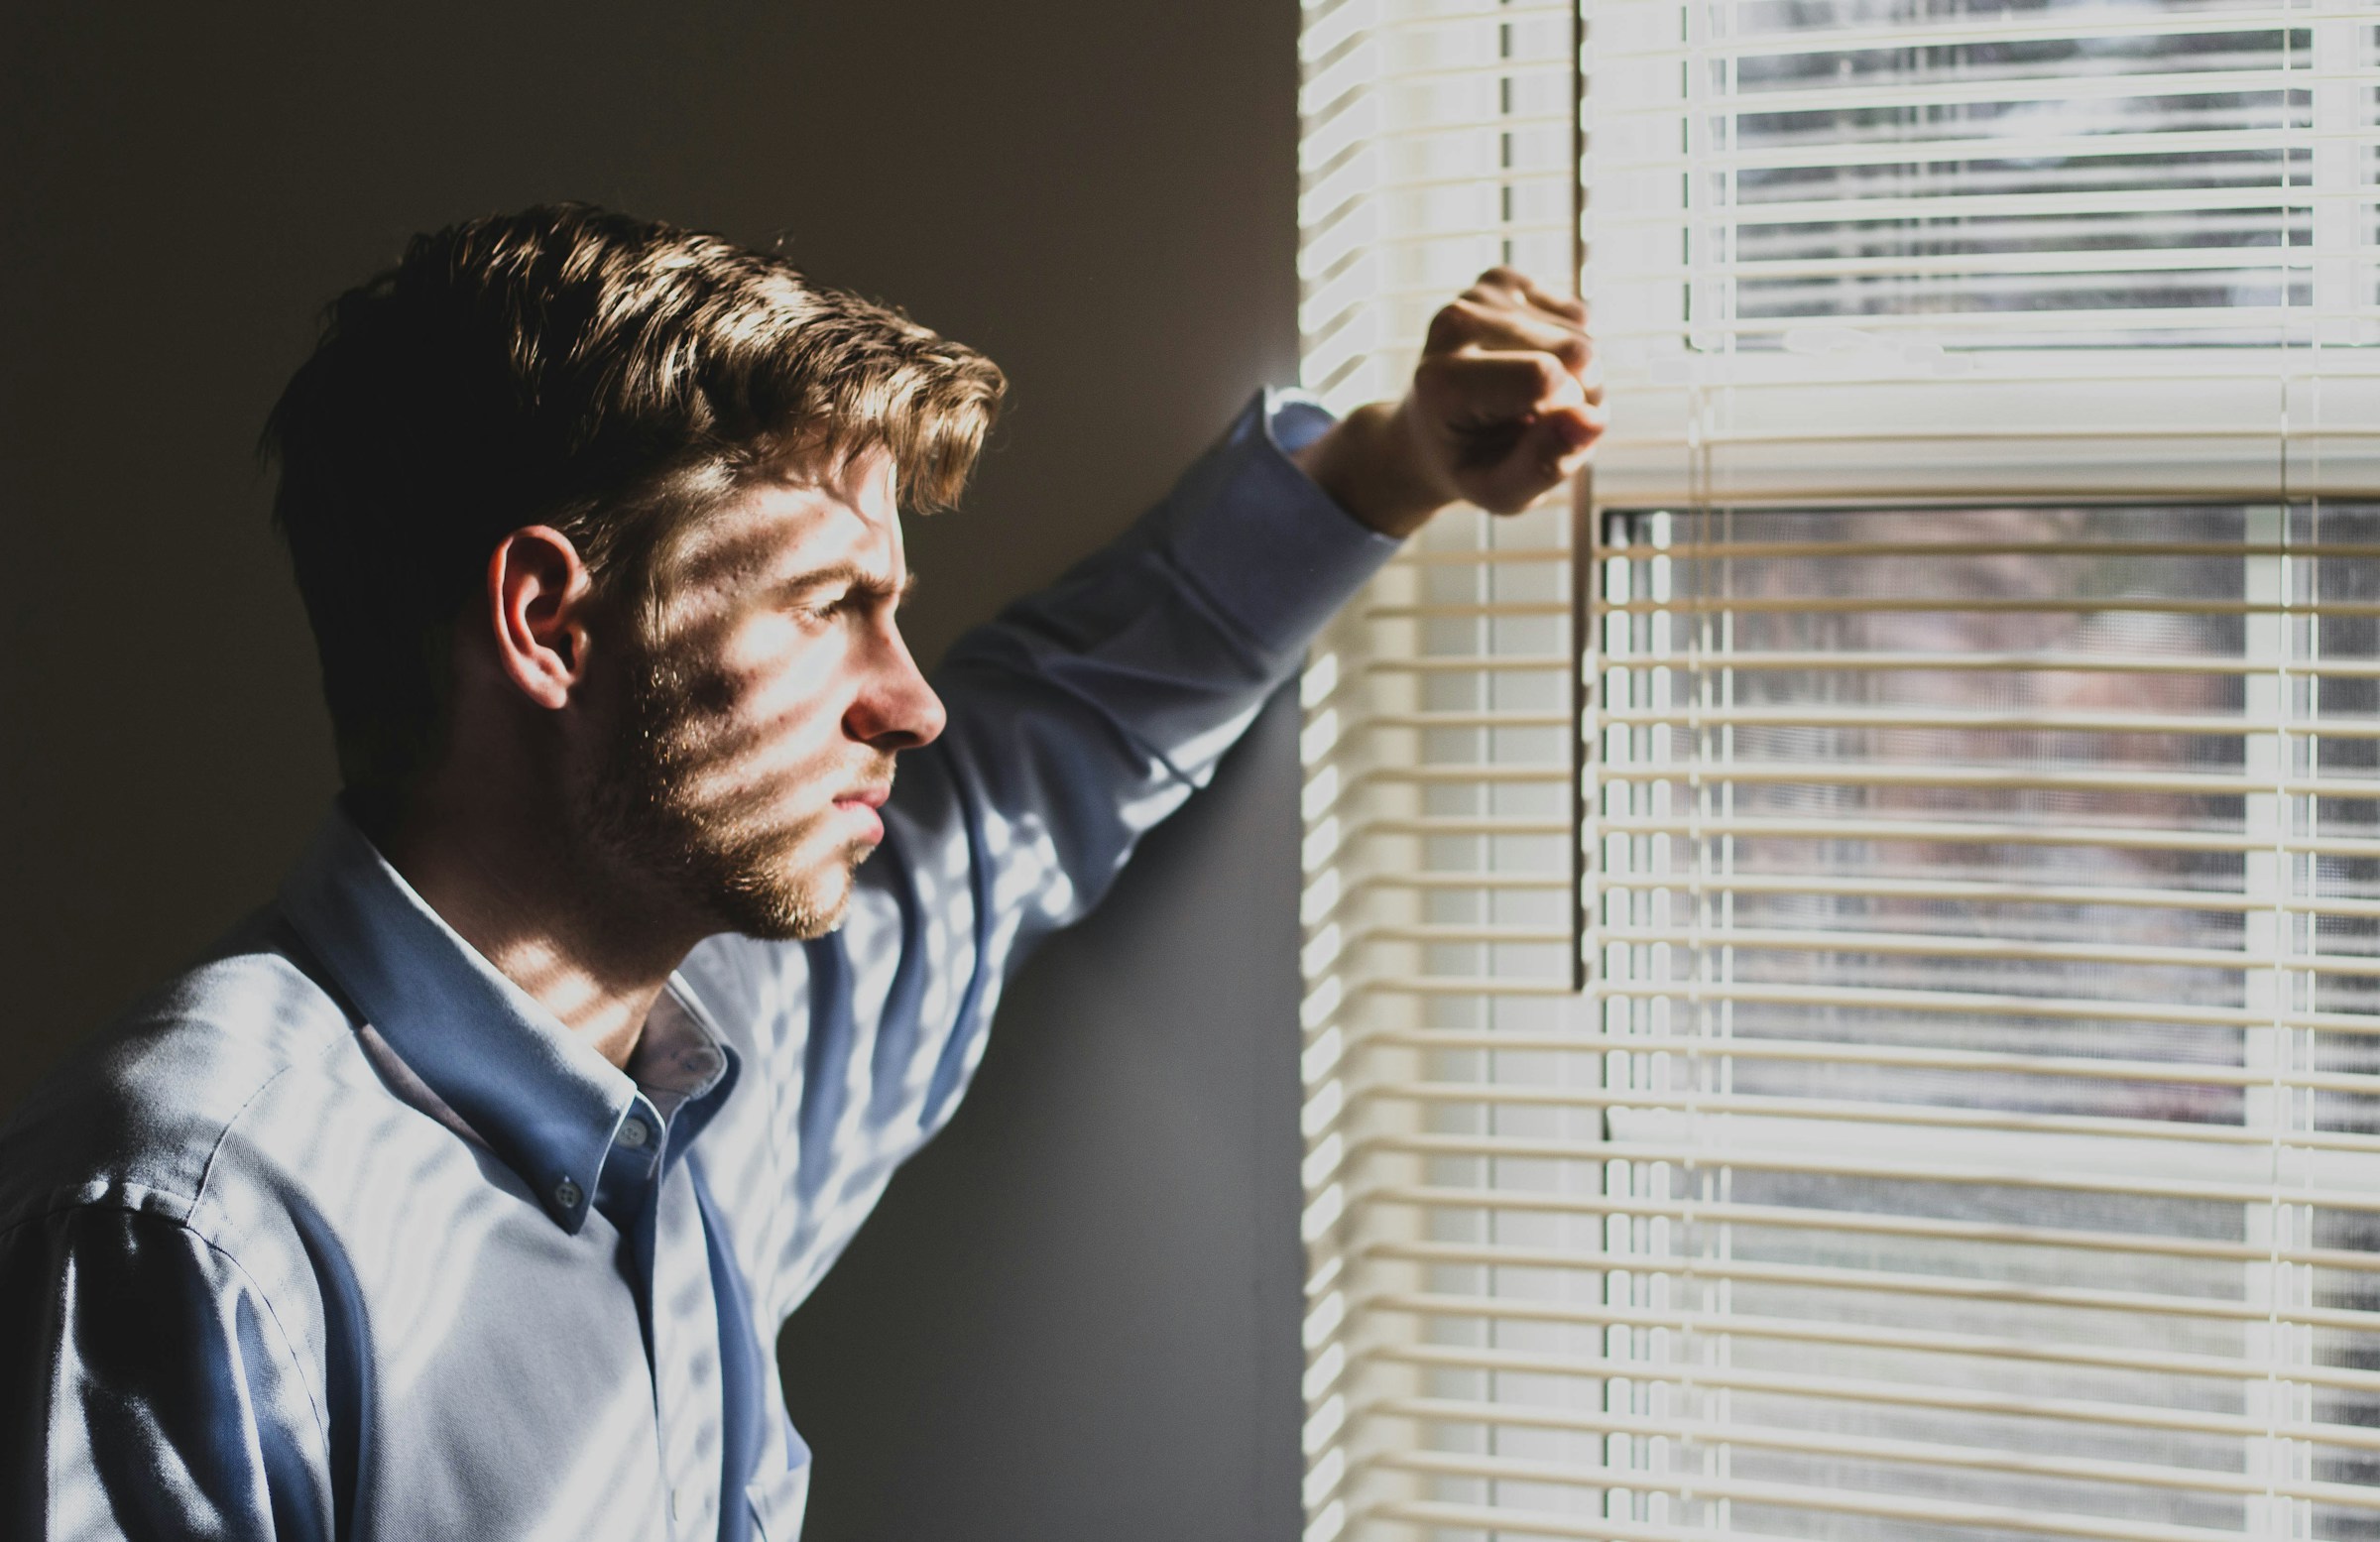 A pensive man looking through the window blinds | Source: Unsplash